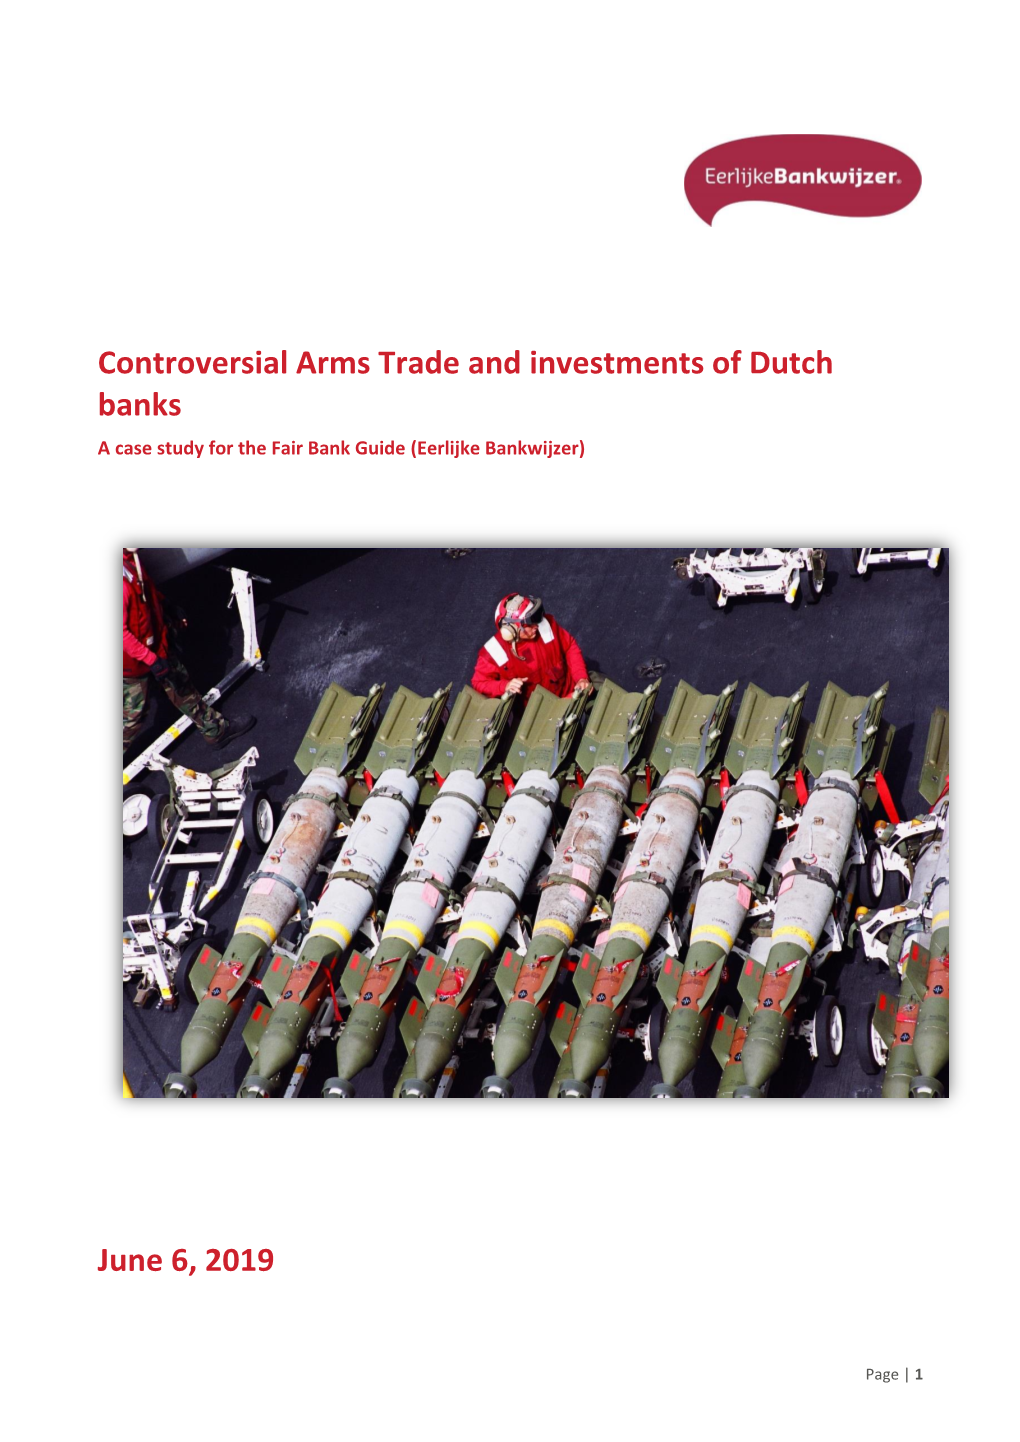 Controversial Arms Trade and Investments of Dutch Banks a Case Study for the Fair Bank Guide (Eerlijke Bankwijzer)